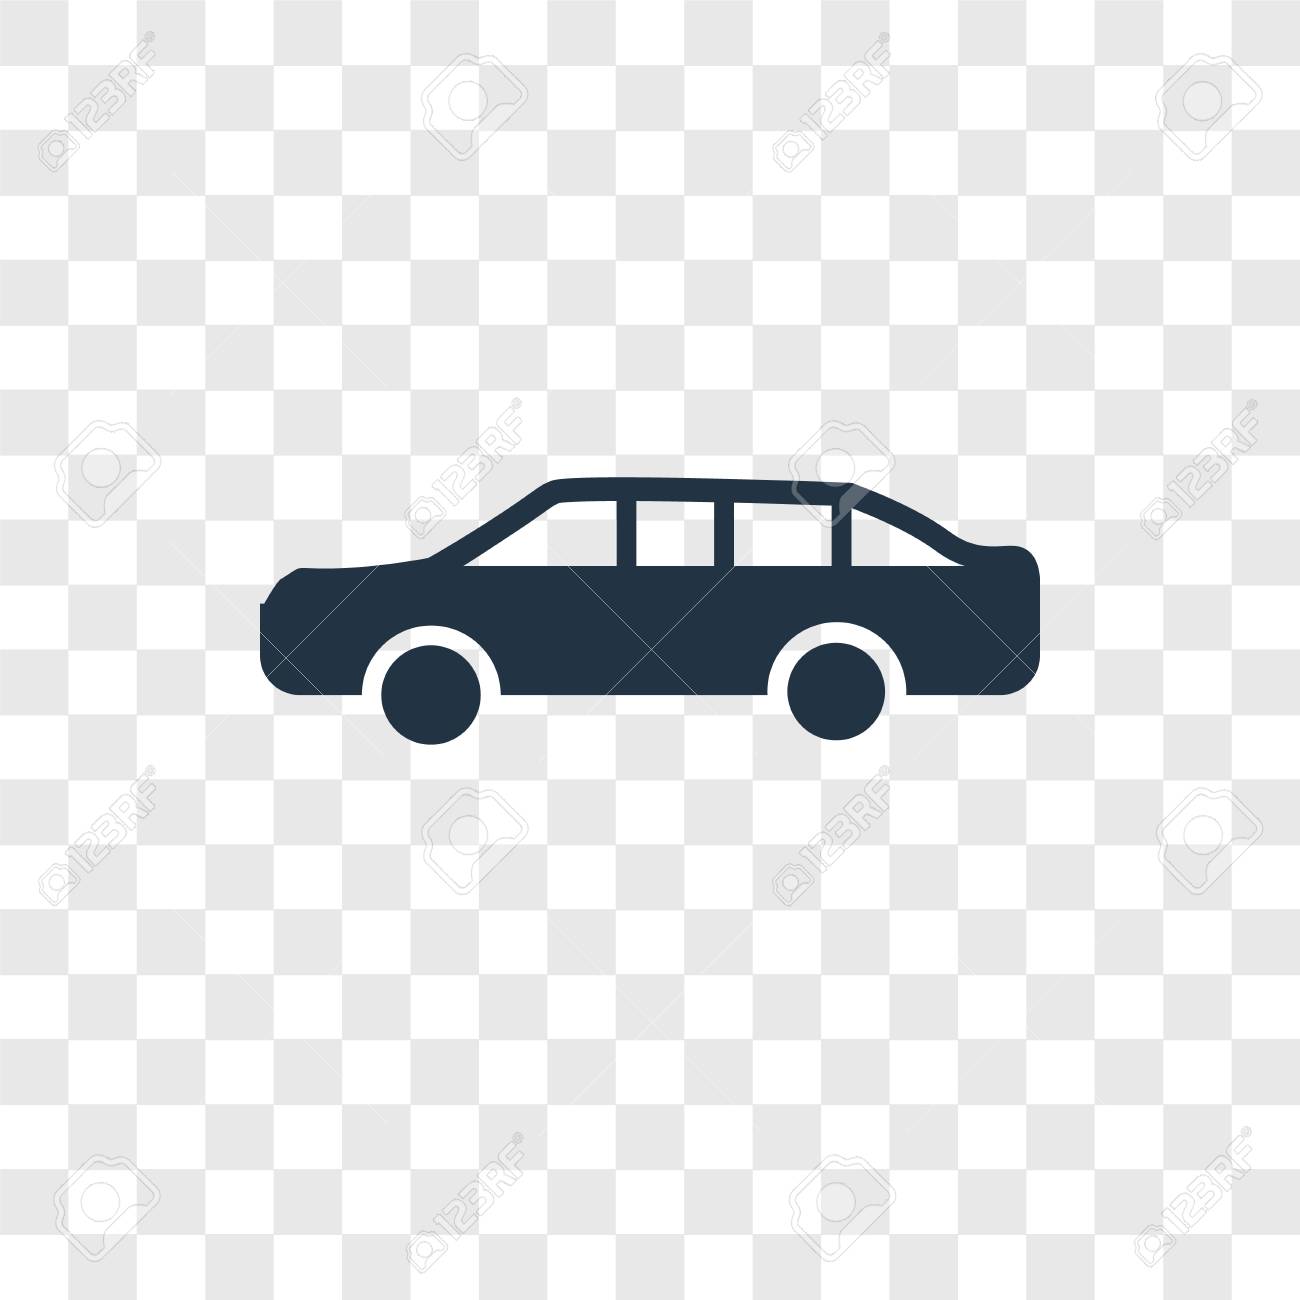 Limousine Vector Icon Isolated On Transparent Background